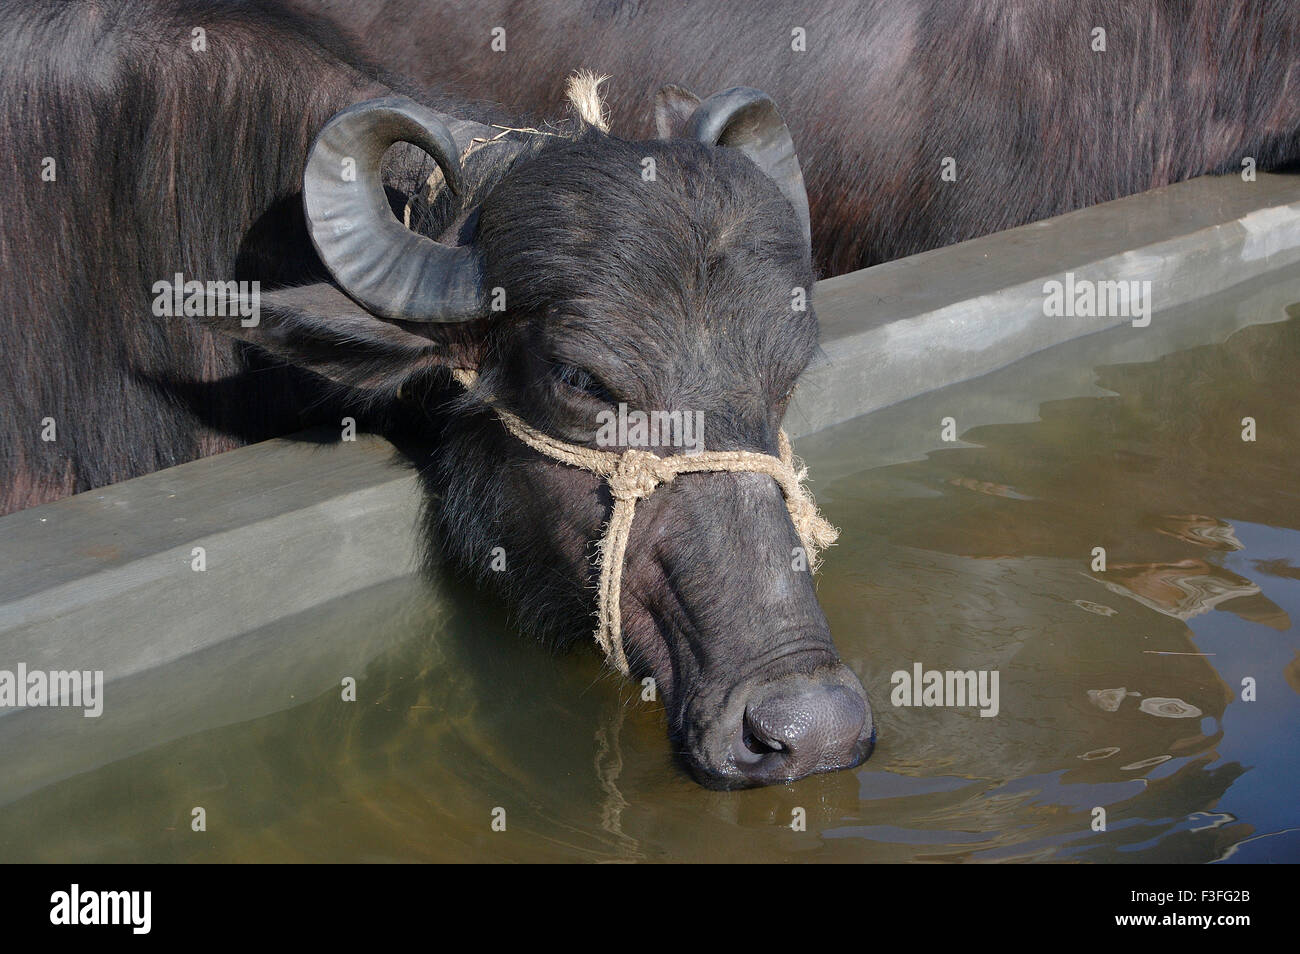 Buffalo drinking water from man made pond, India, Asia Stock Photo